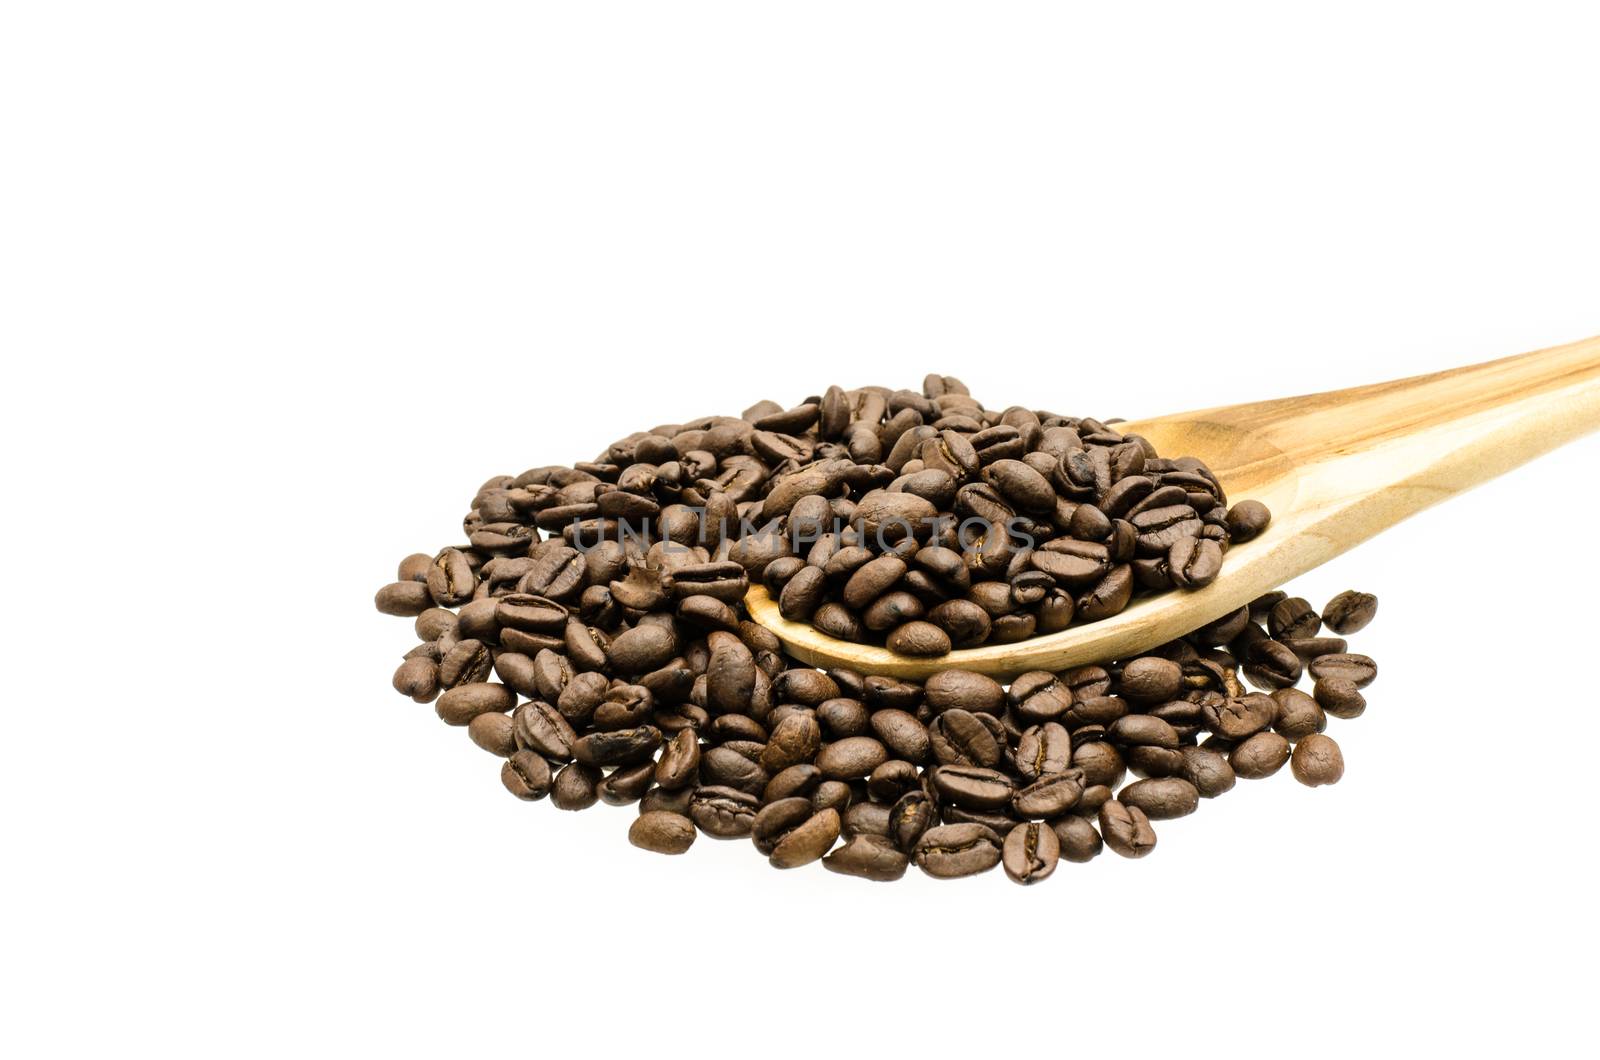 Coffee beans in  wood ladle and scattered, isolated over white background.